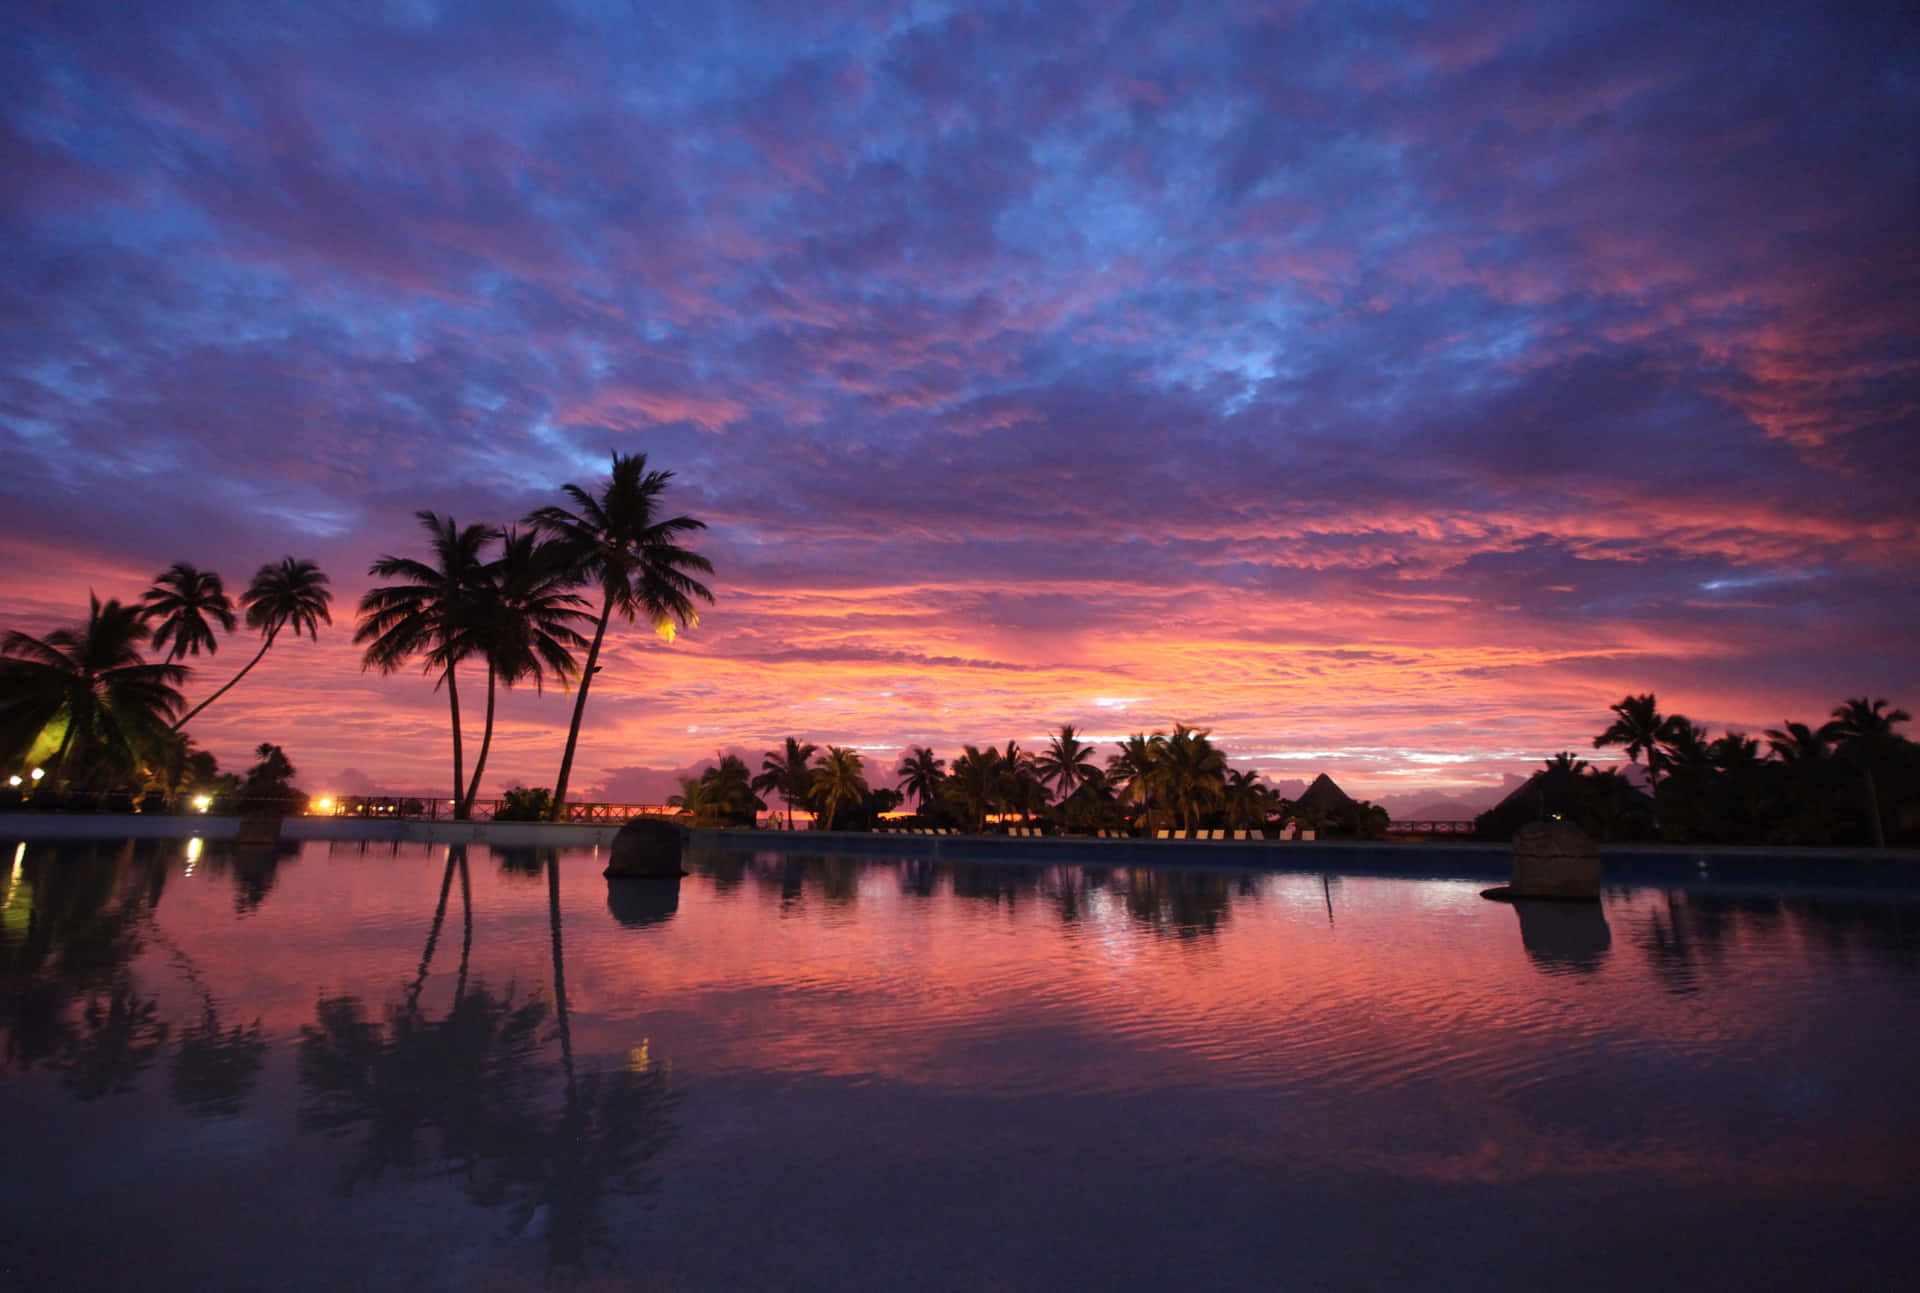 A Sunset Over A Pool With Palm Trees